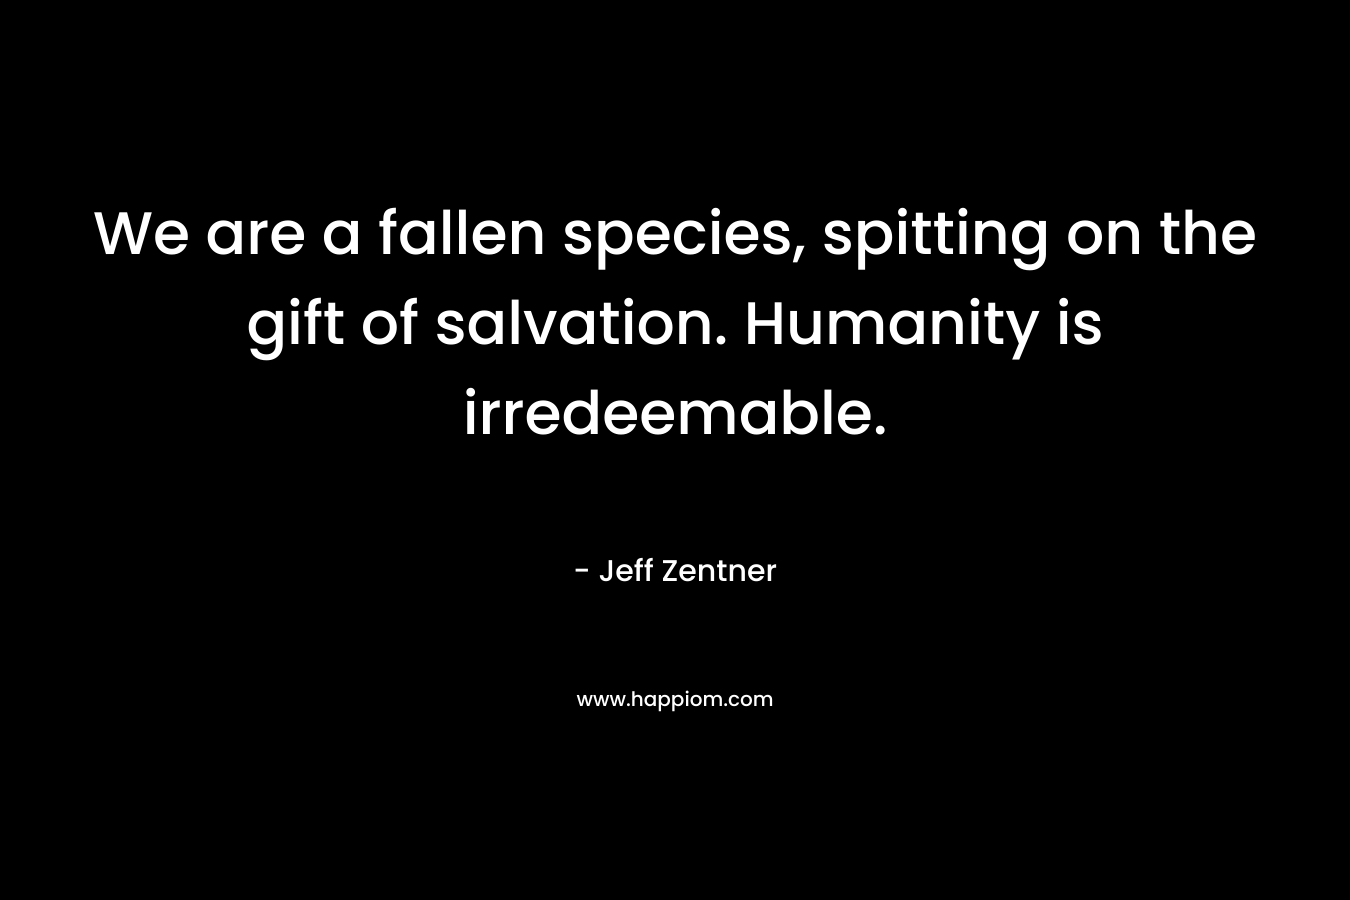 We are a fallen species, spitting on the gift of salvation. Humanity is irredeemable.